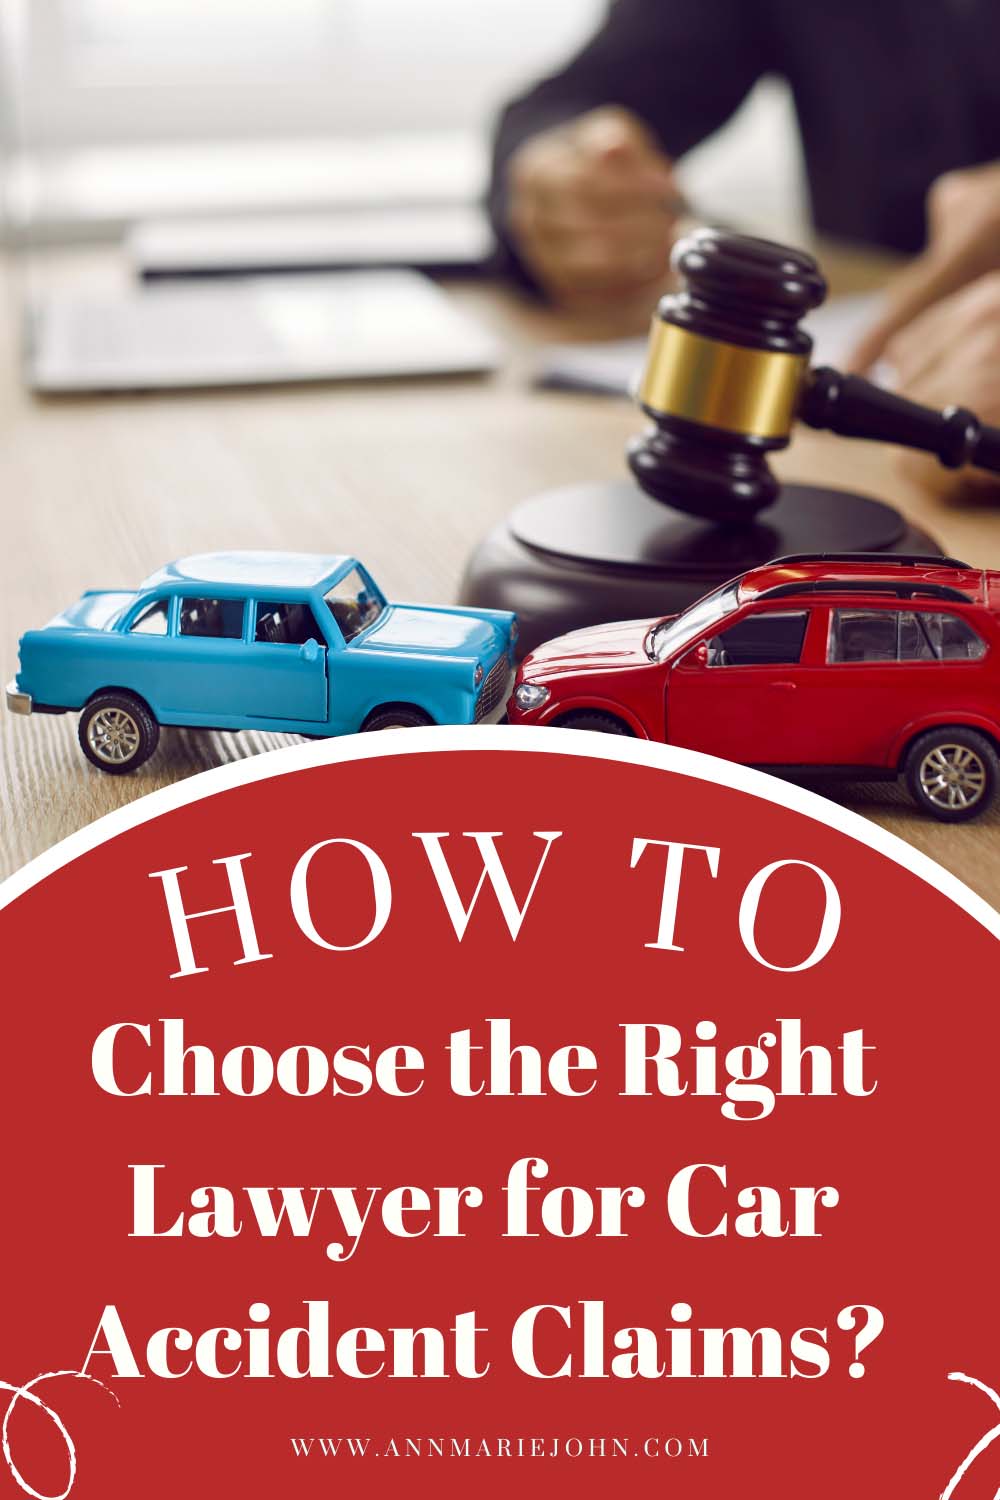 How To Choose the Right Lawyer for Car Accident Claims